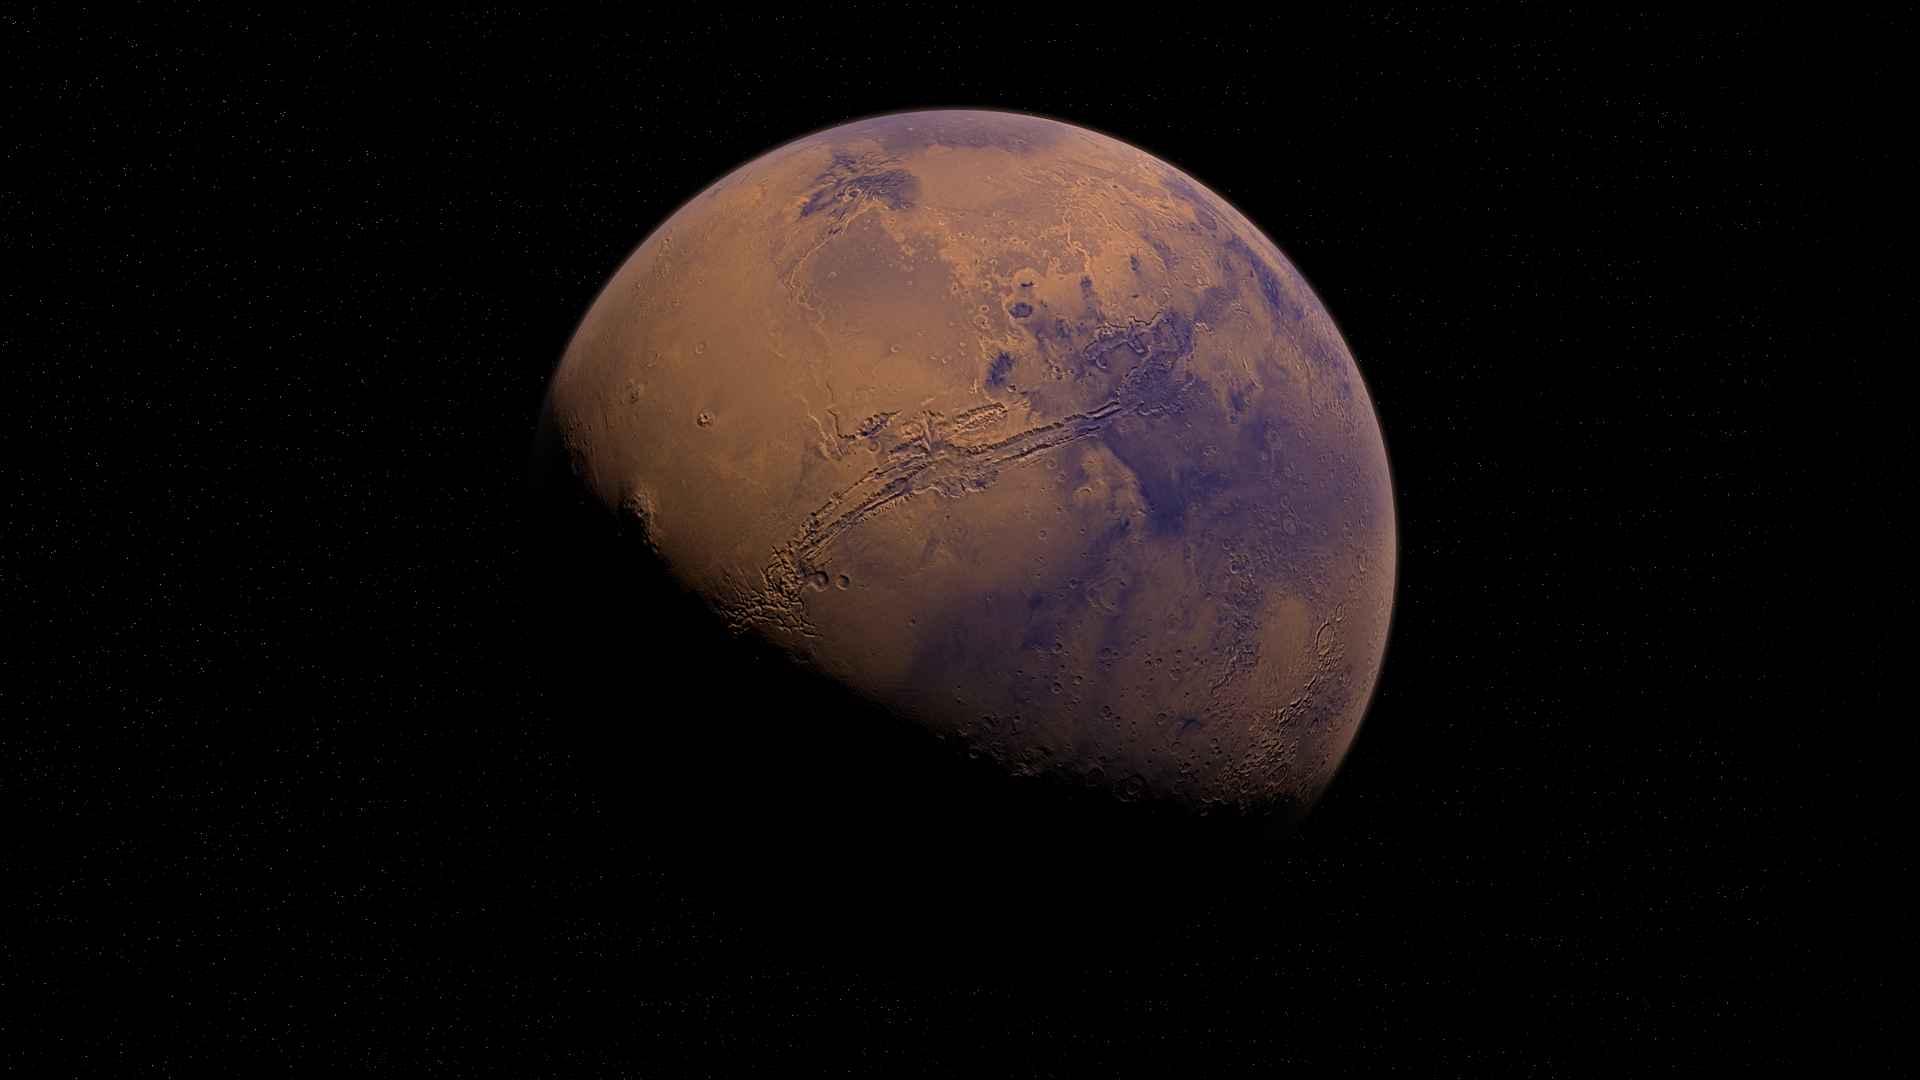 Mars panorama with a resolution of 2.5 billion pixels.  The Red Planet presents itself in an unforgettable way